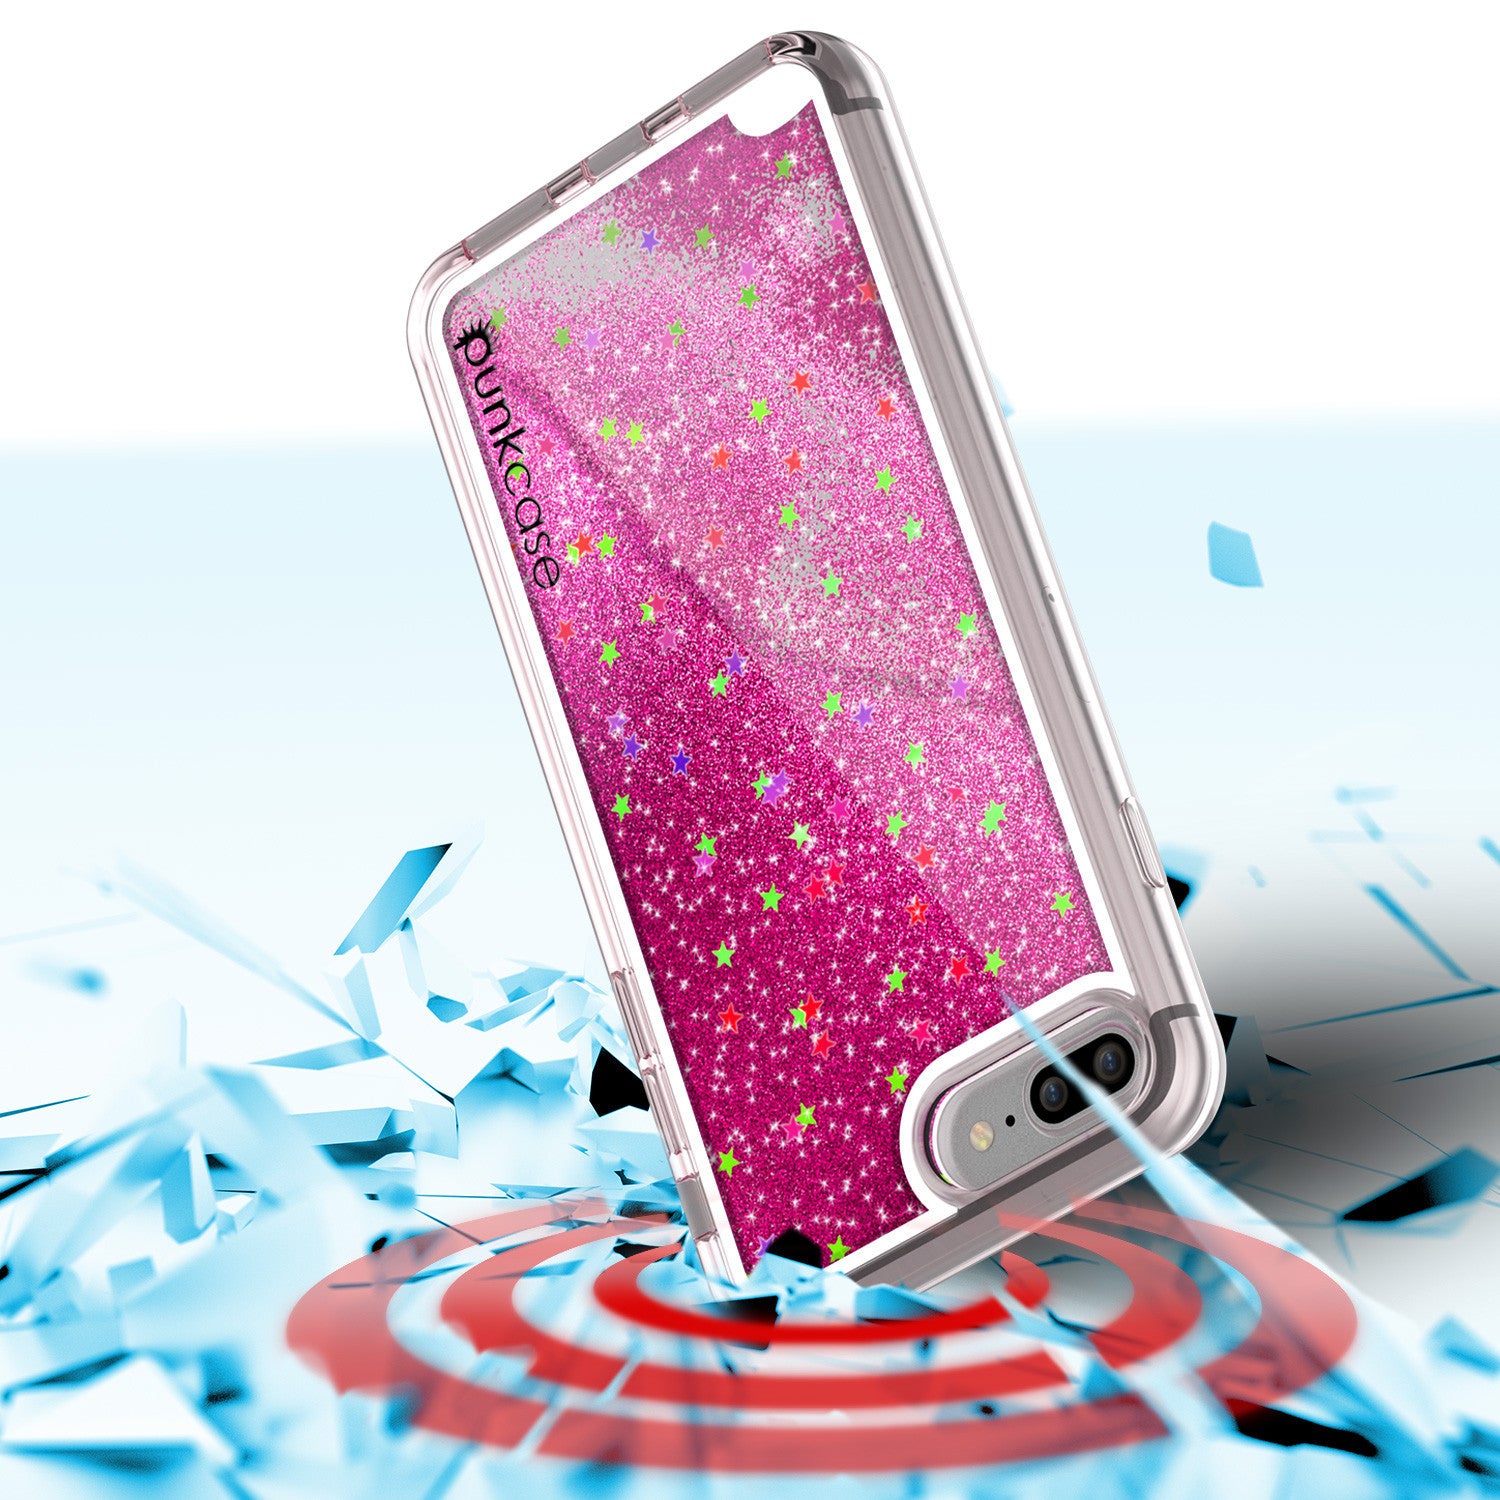 iPhone 7 Plus Case, PunkCase LIQUID Pink Series, Protective Dual Layer Floating Glitter Cover